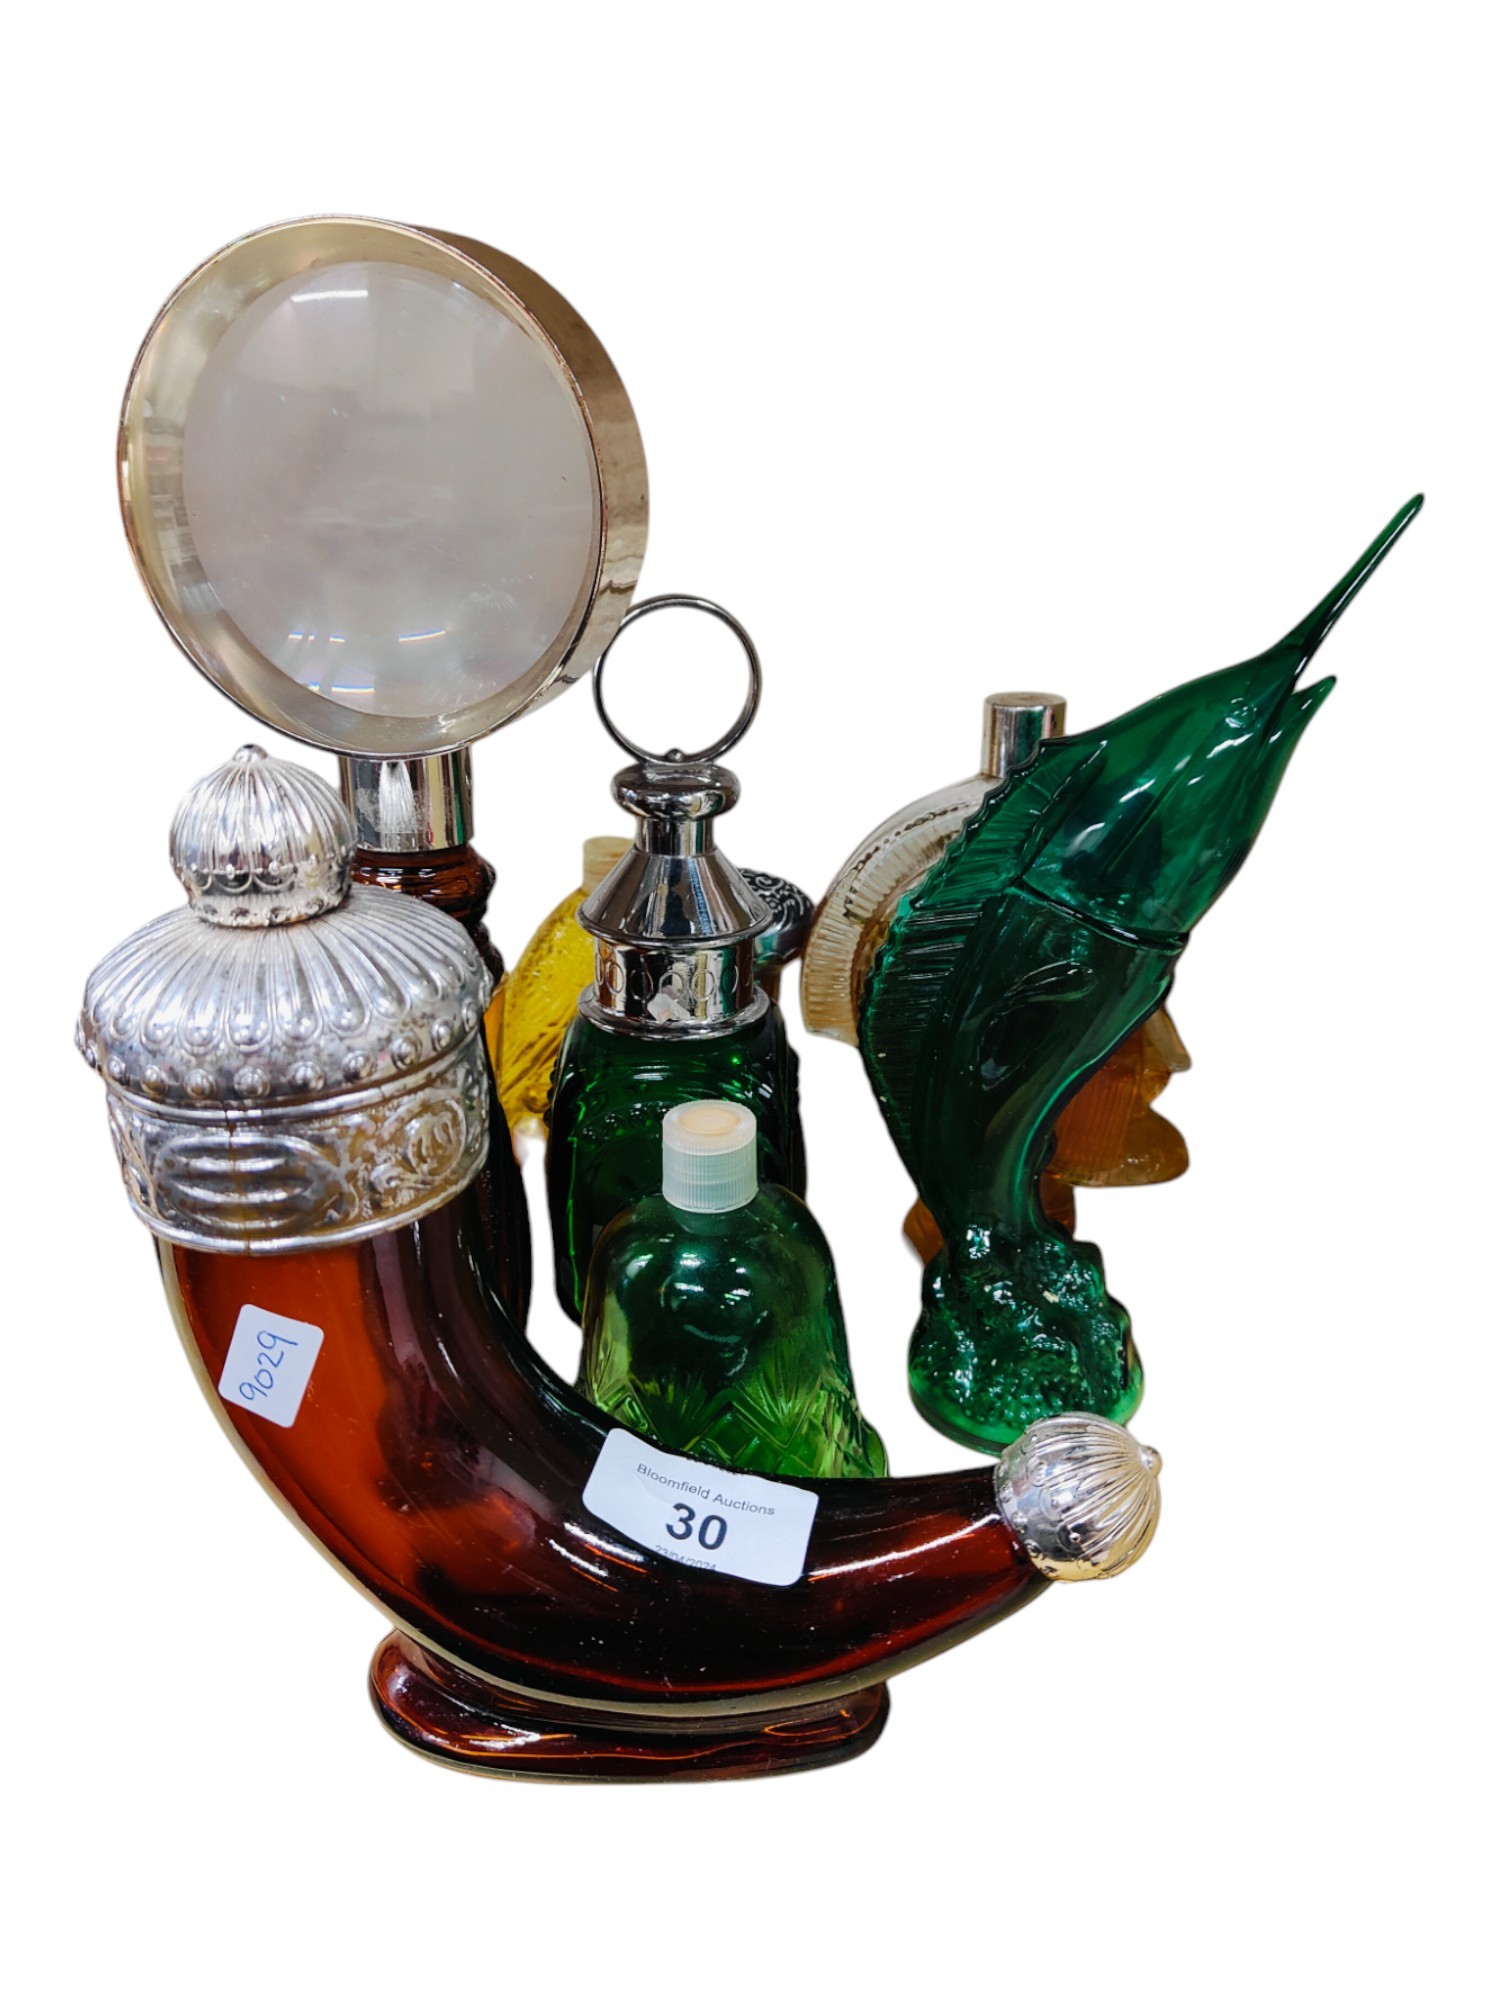 COLLECTION OF VINTAGE GLASS AVON BOTTLES